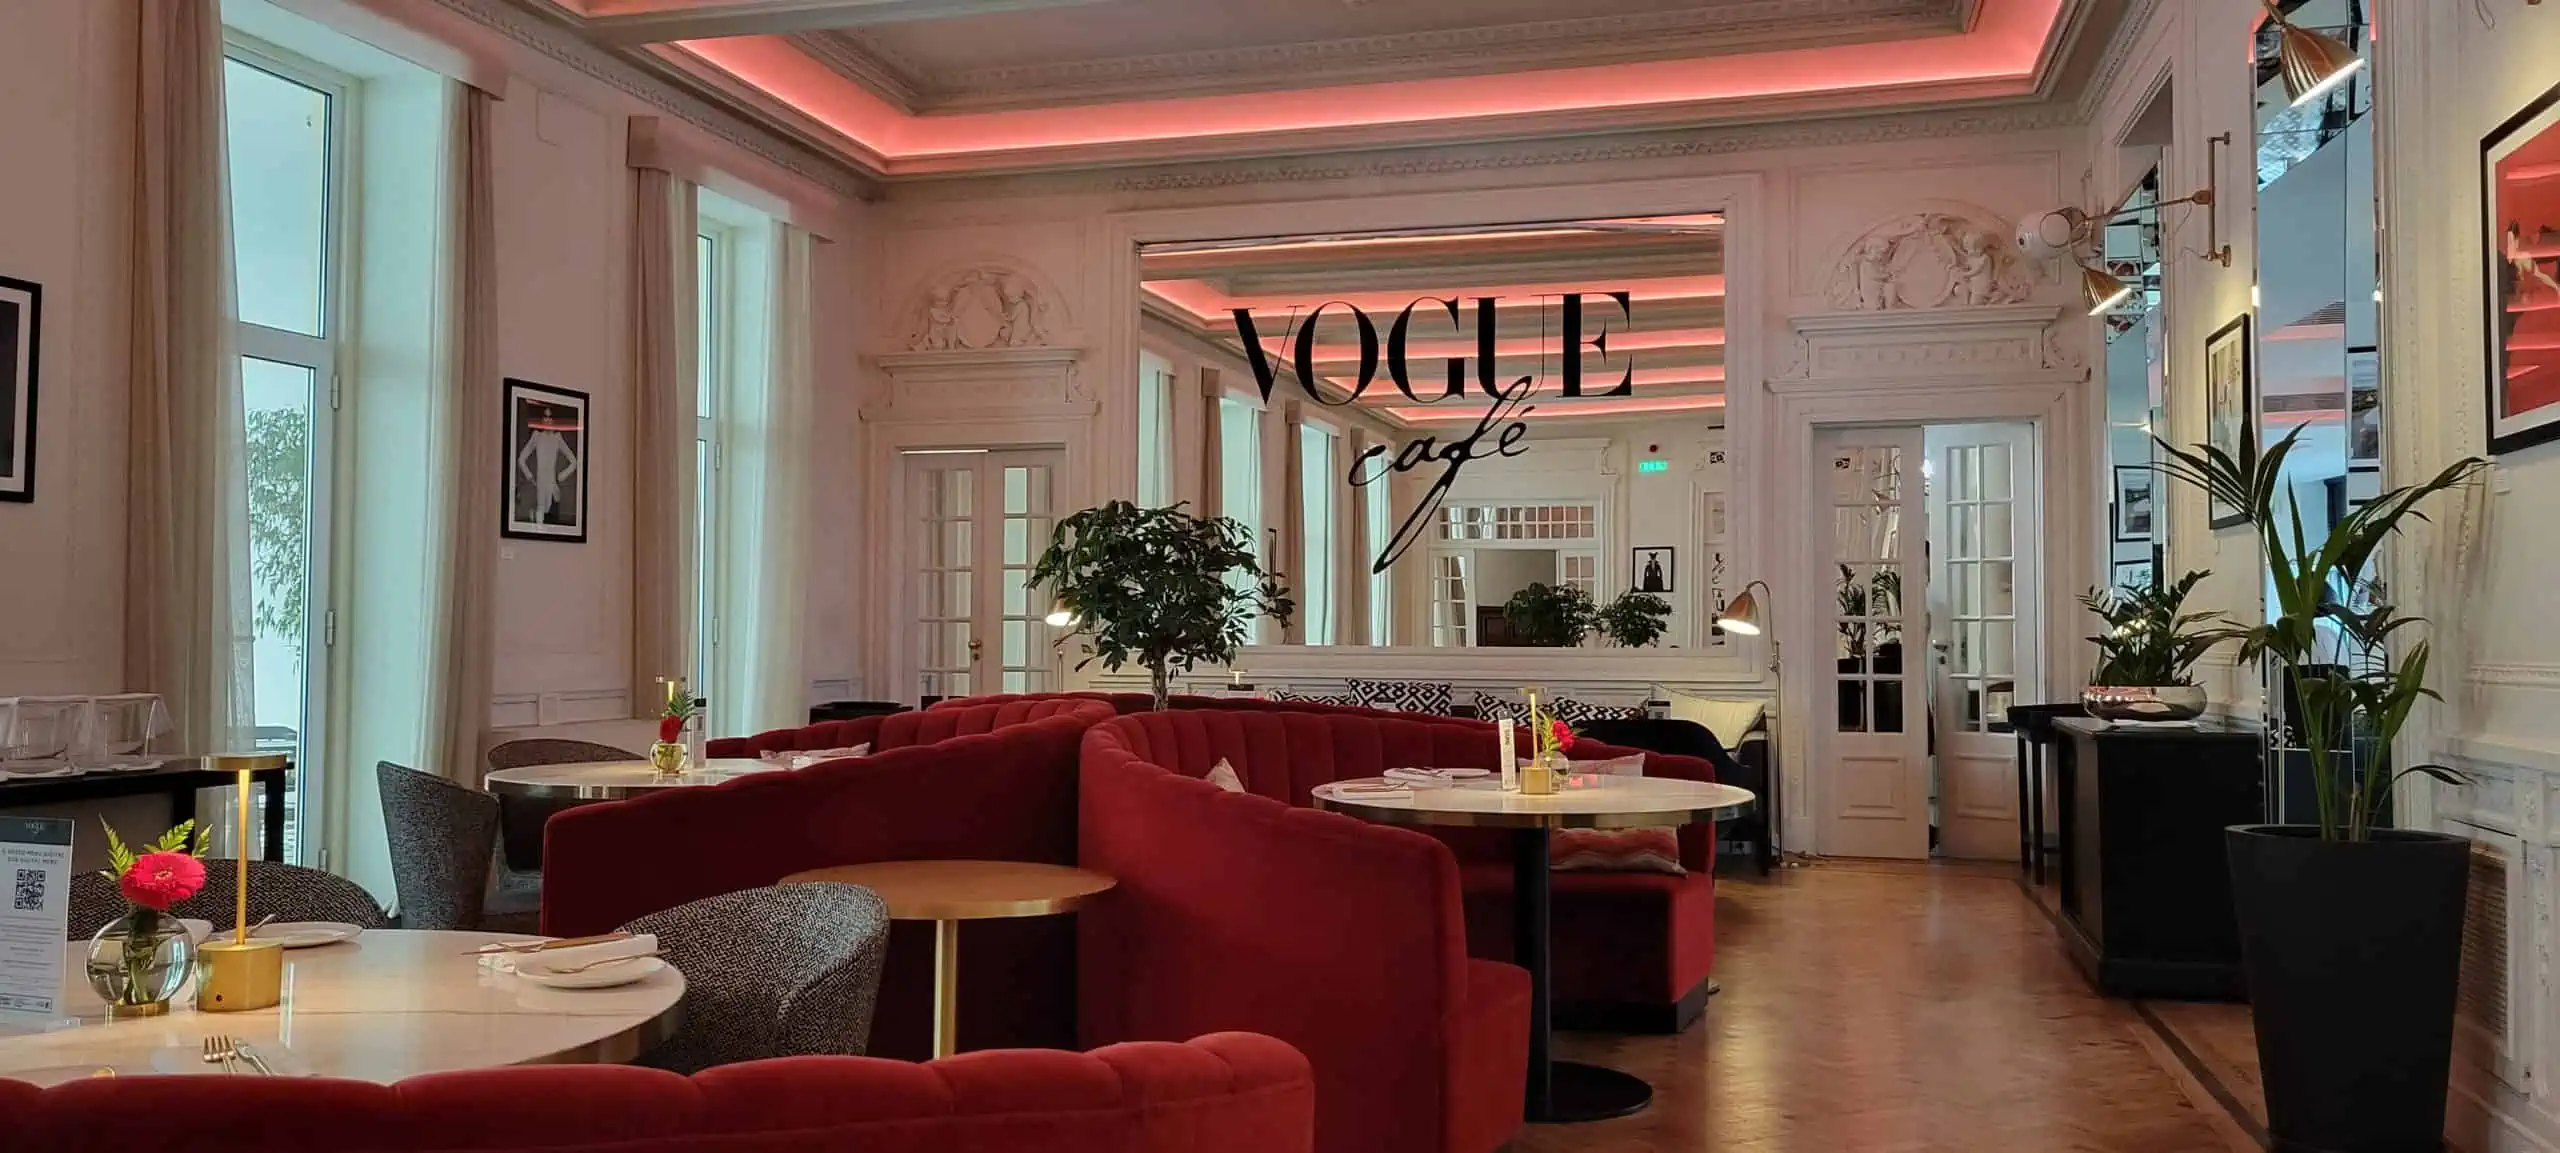 Vogue Cafe - Portugal Itinerary